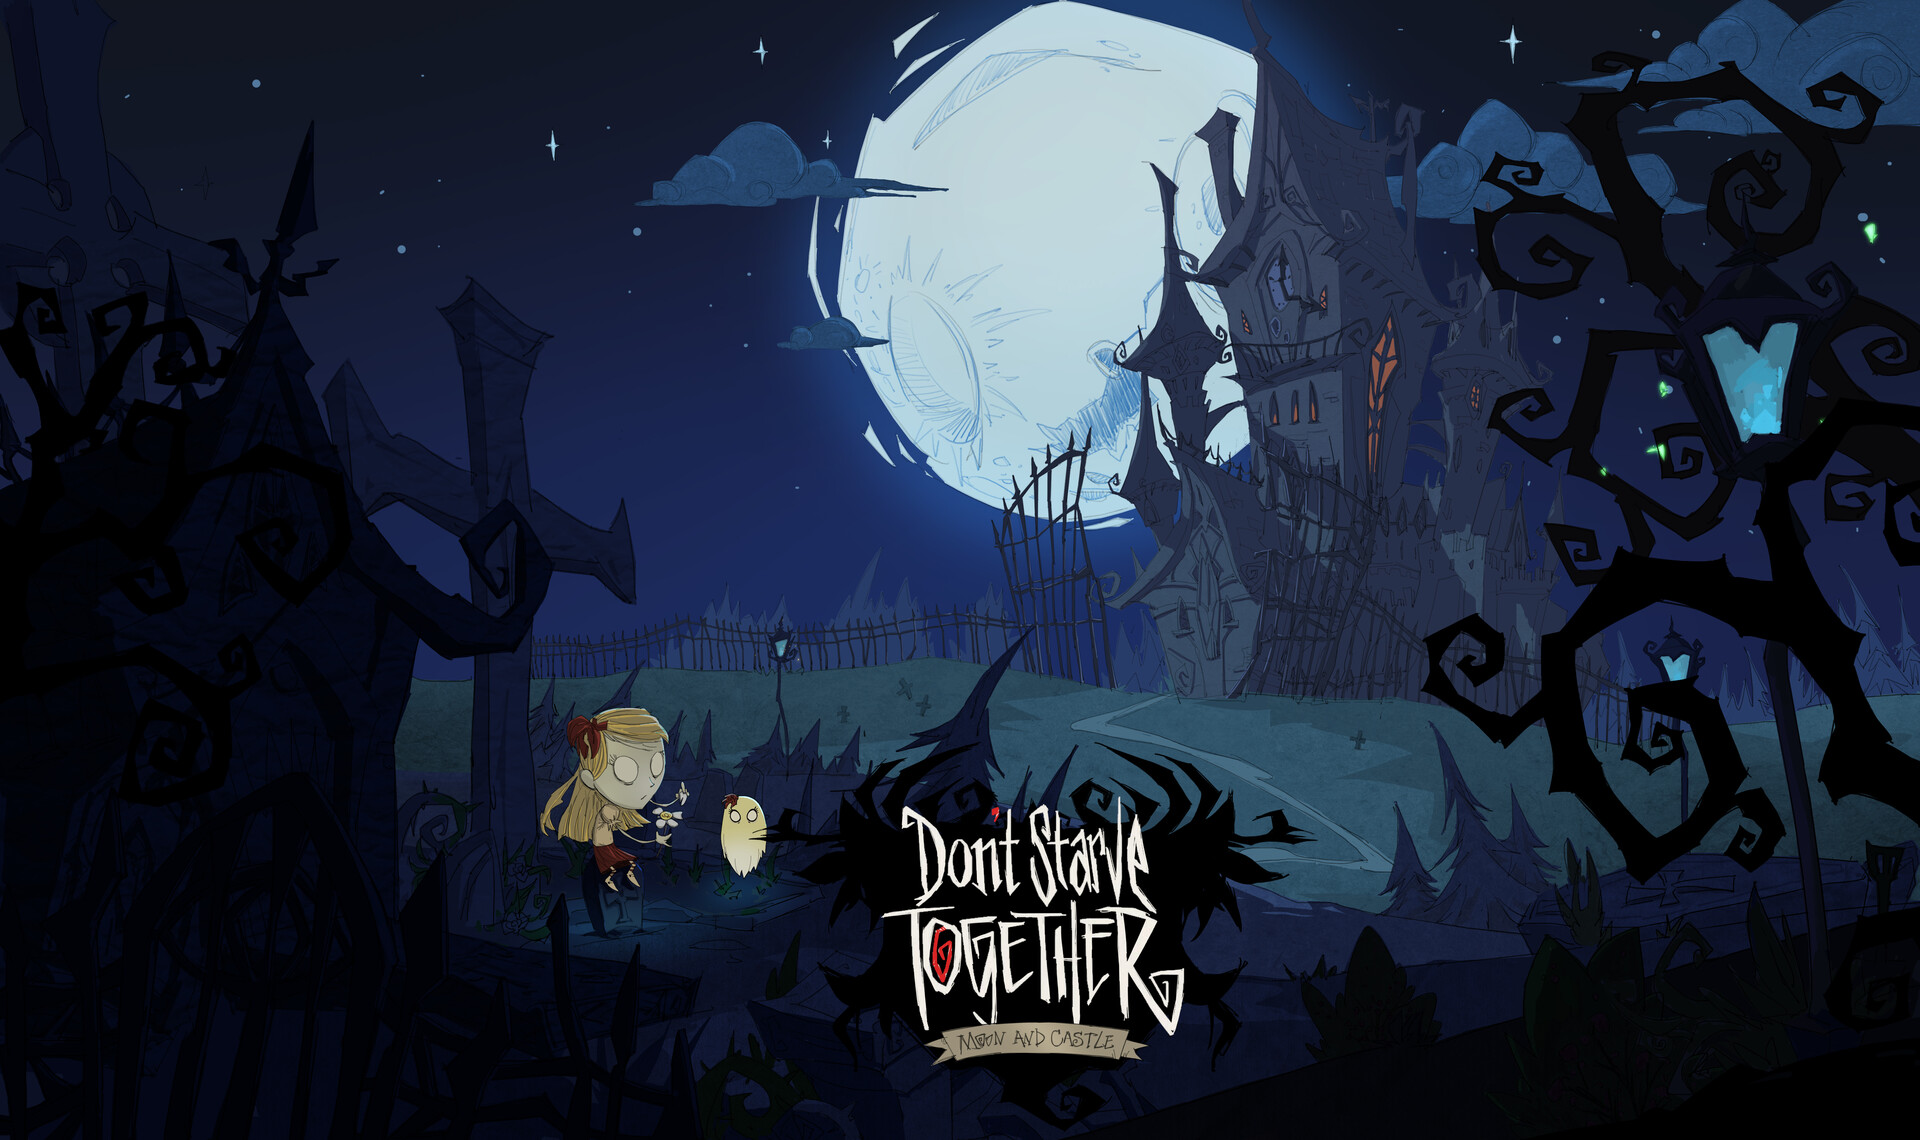 Don't Starve - Moon and Castle by Xue Kai